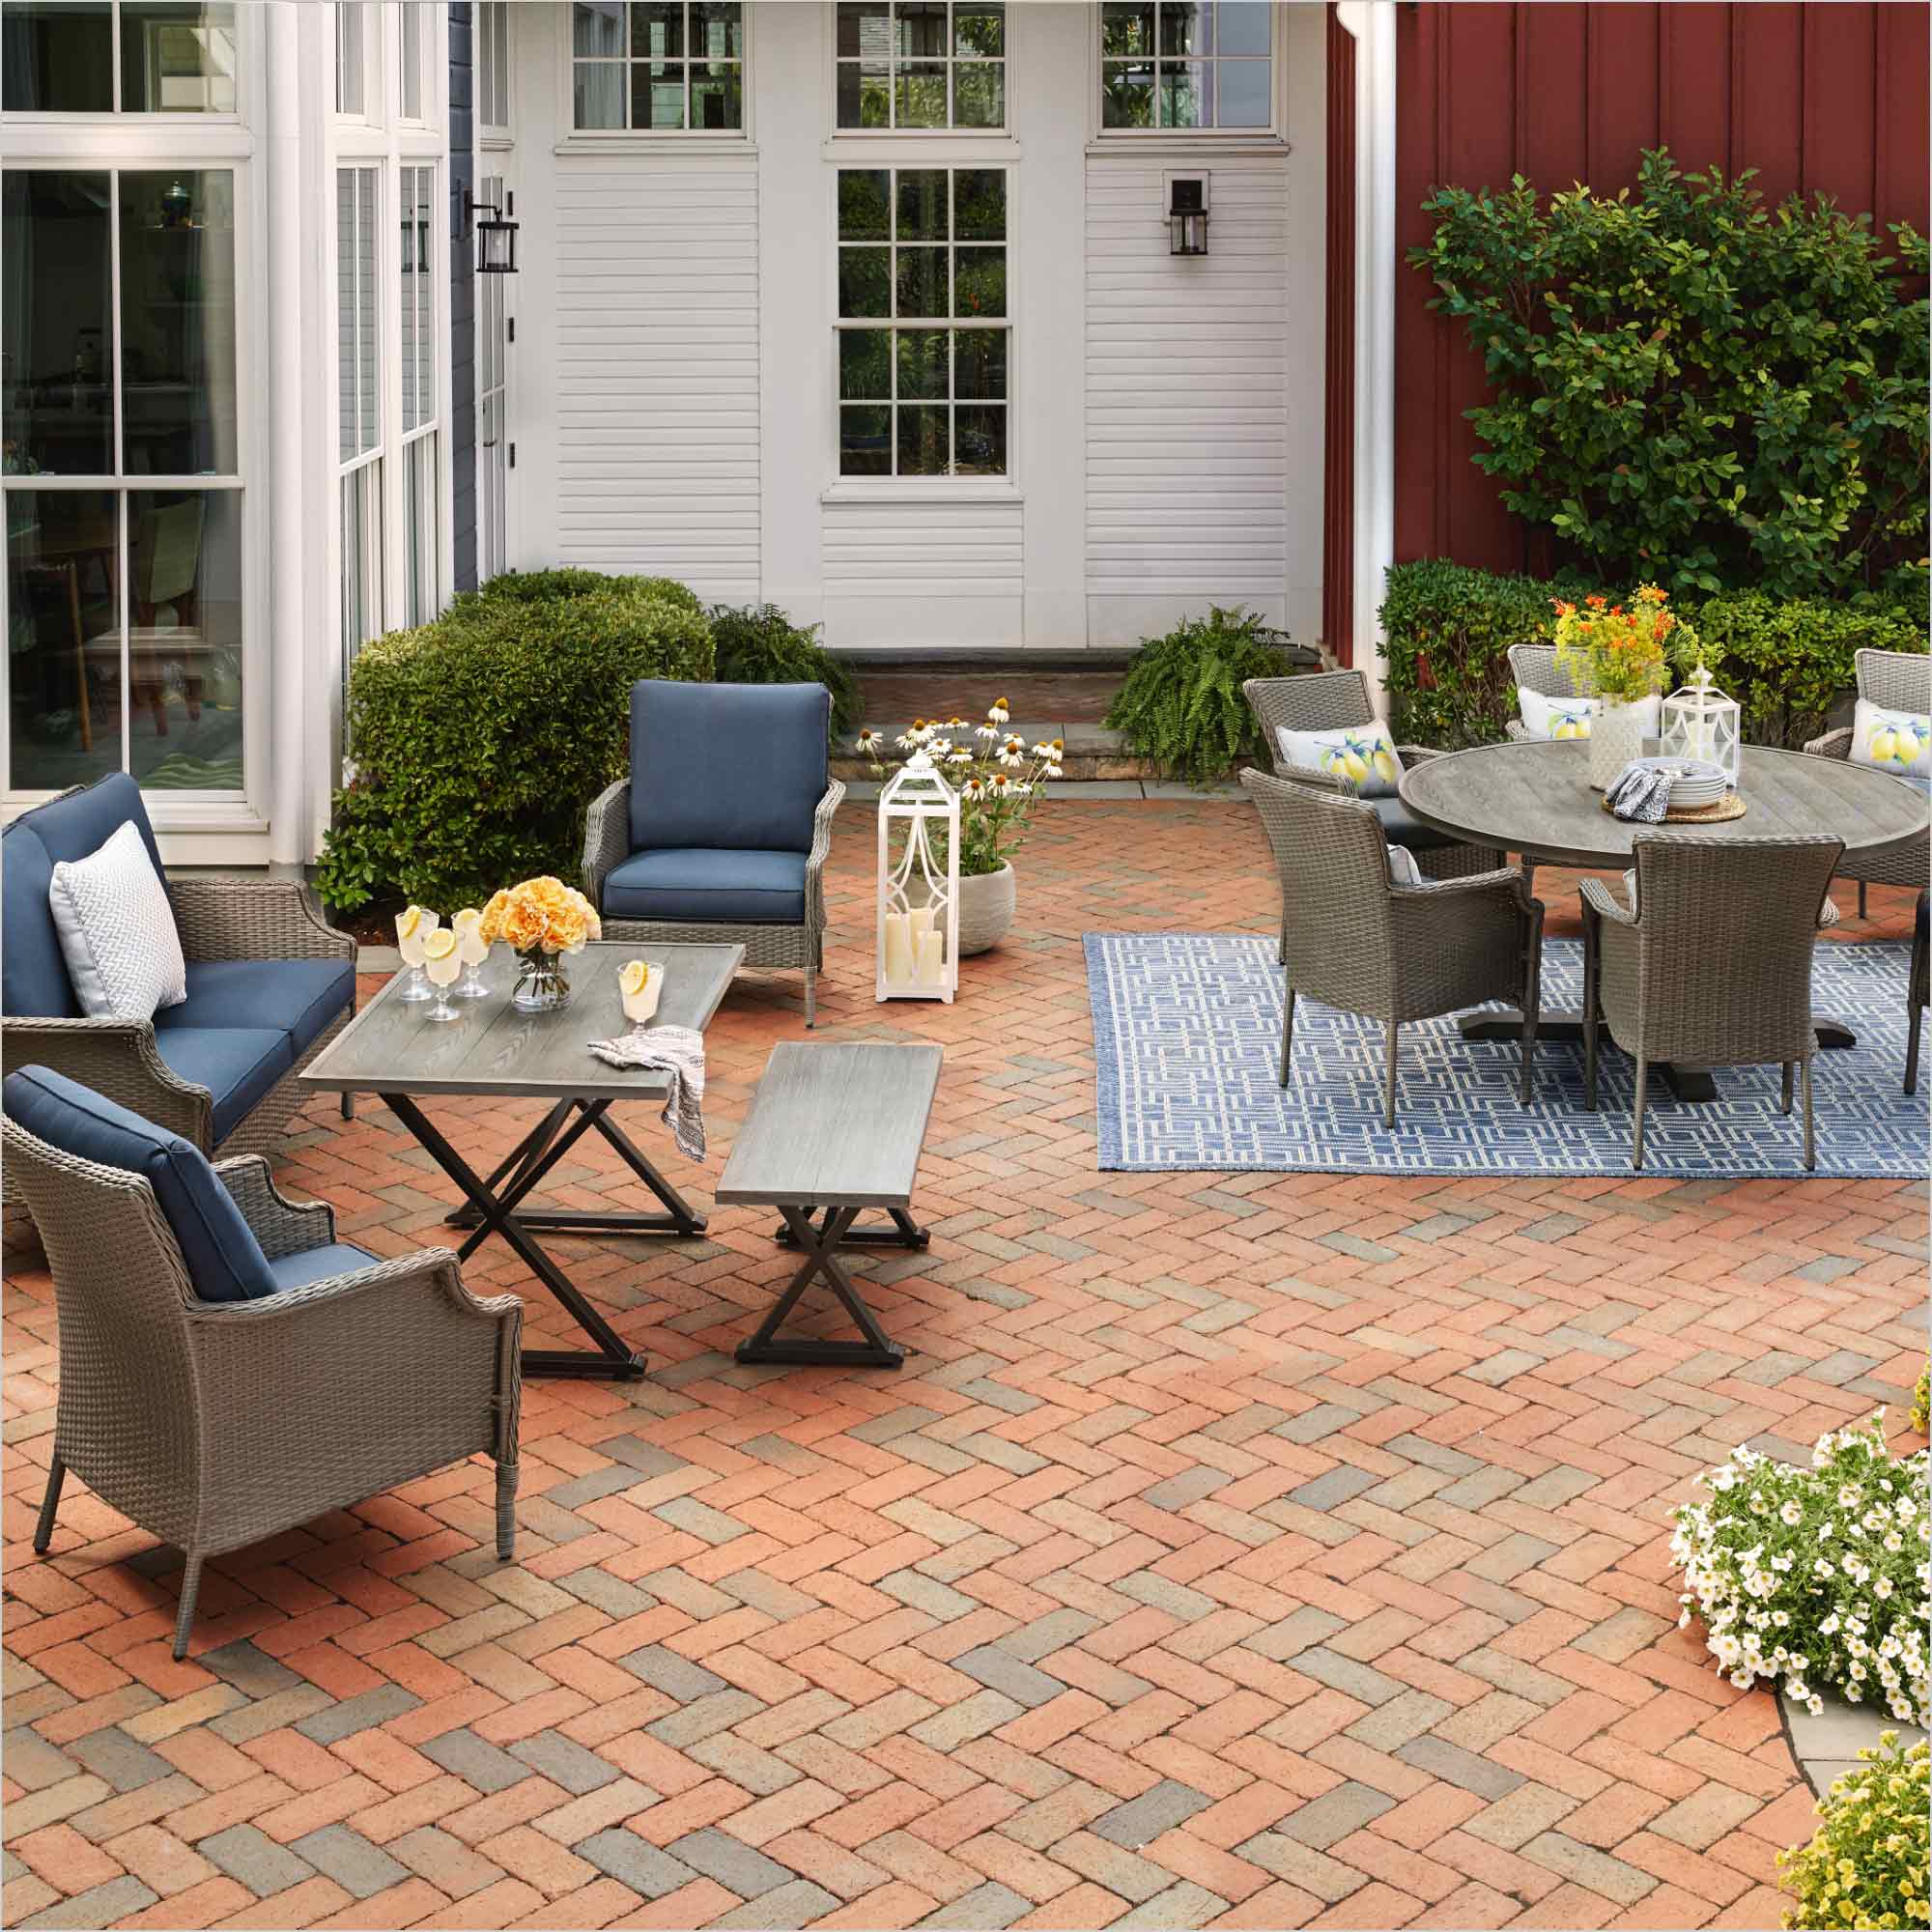 Fascination About Maryland Decking Paver Patio Construction Company Near Me Lutherville-timonium Md